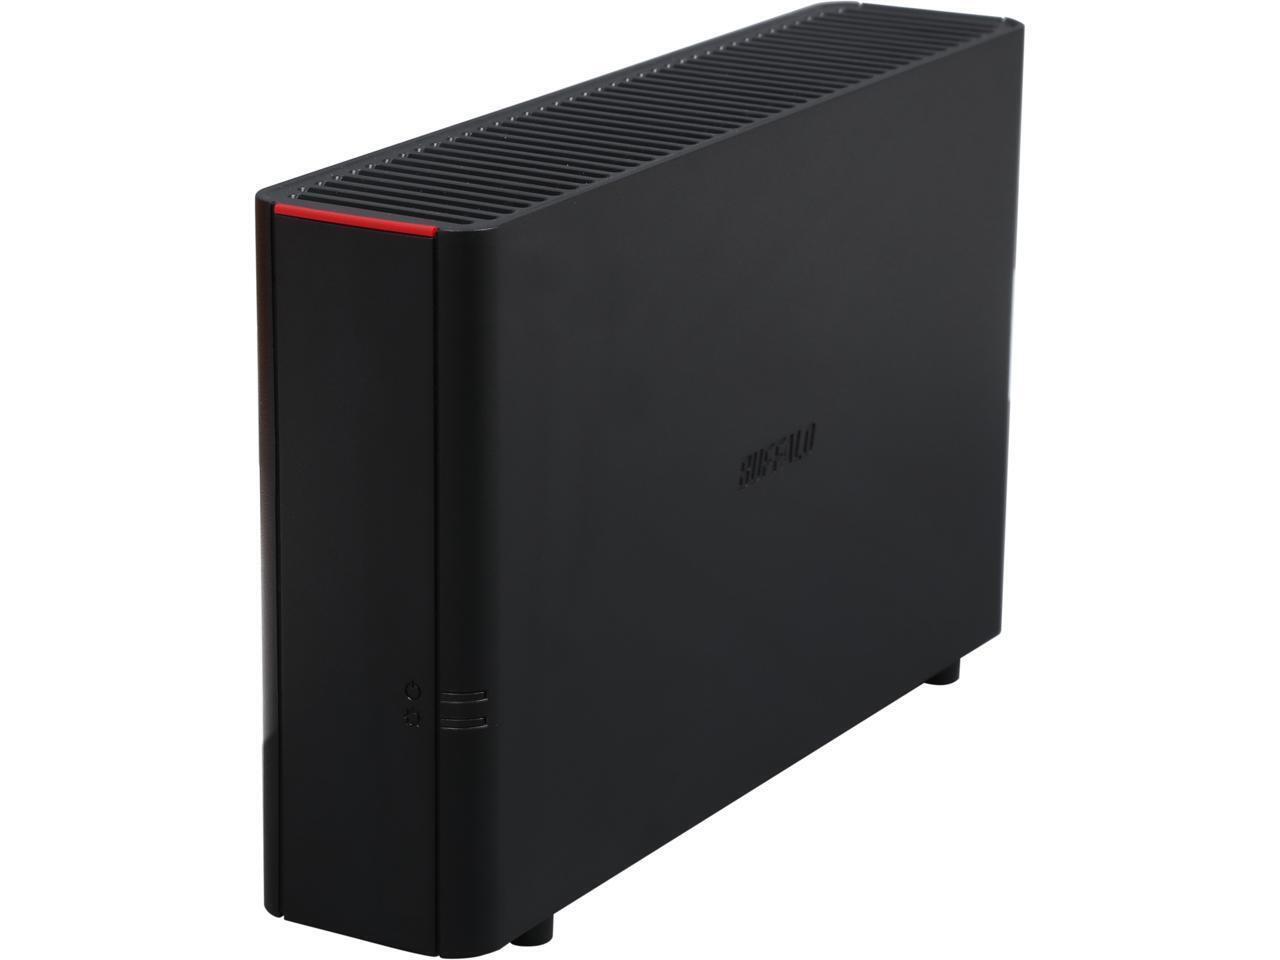 LinkStation 210 2TB Personal Cloud Storage with Hard Drives Included (LS210D0201